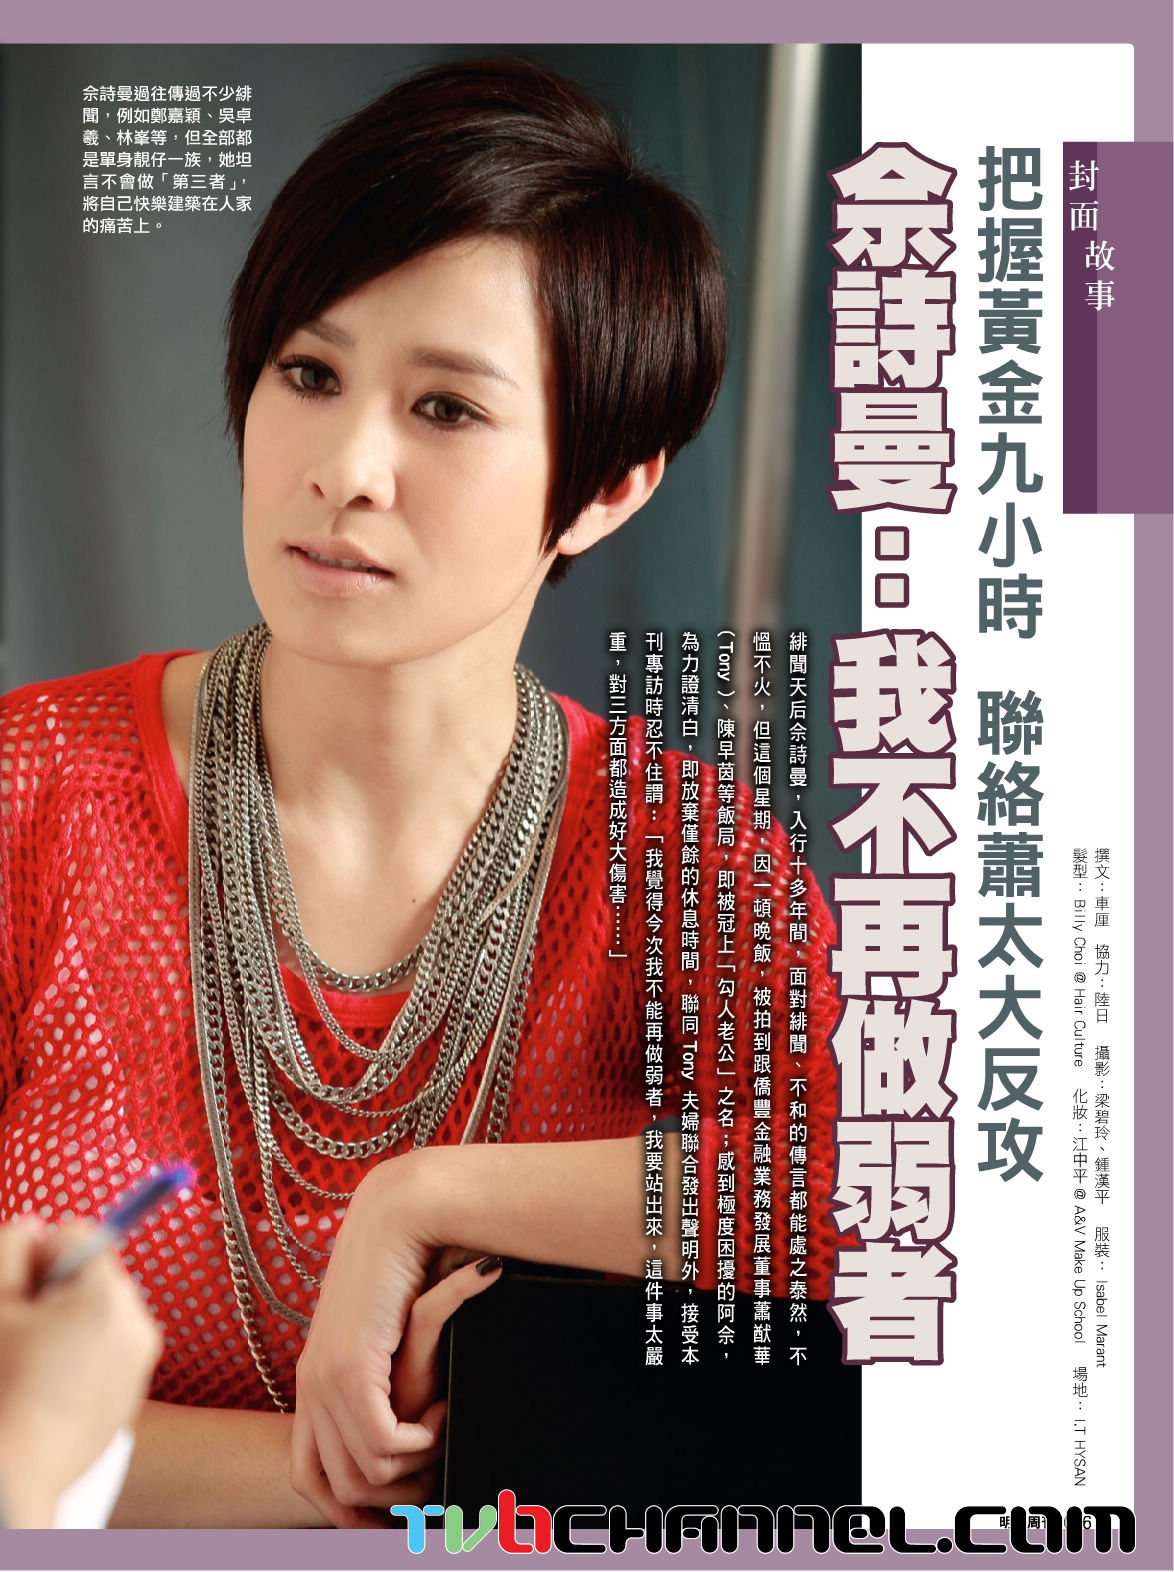 Charmaine Sheh - Picture Actress